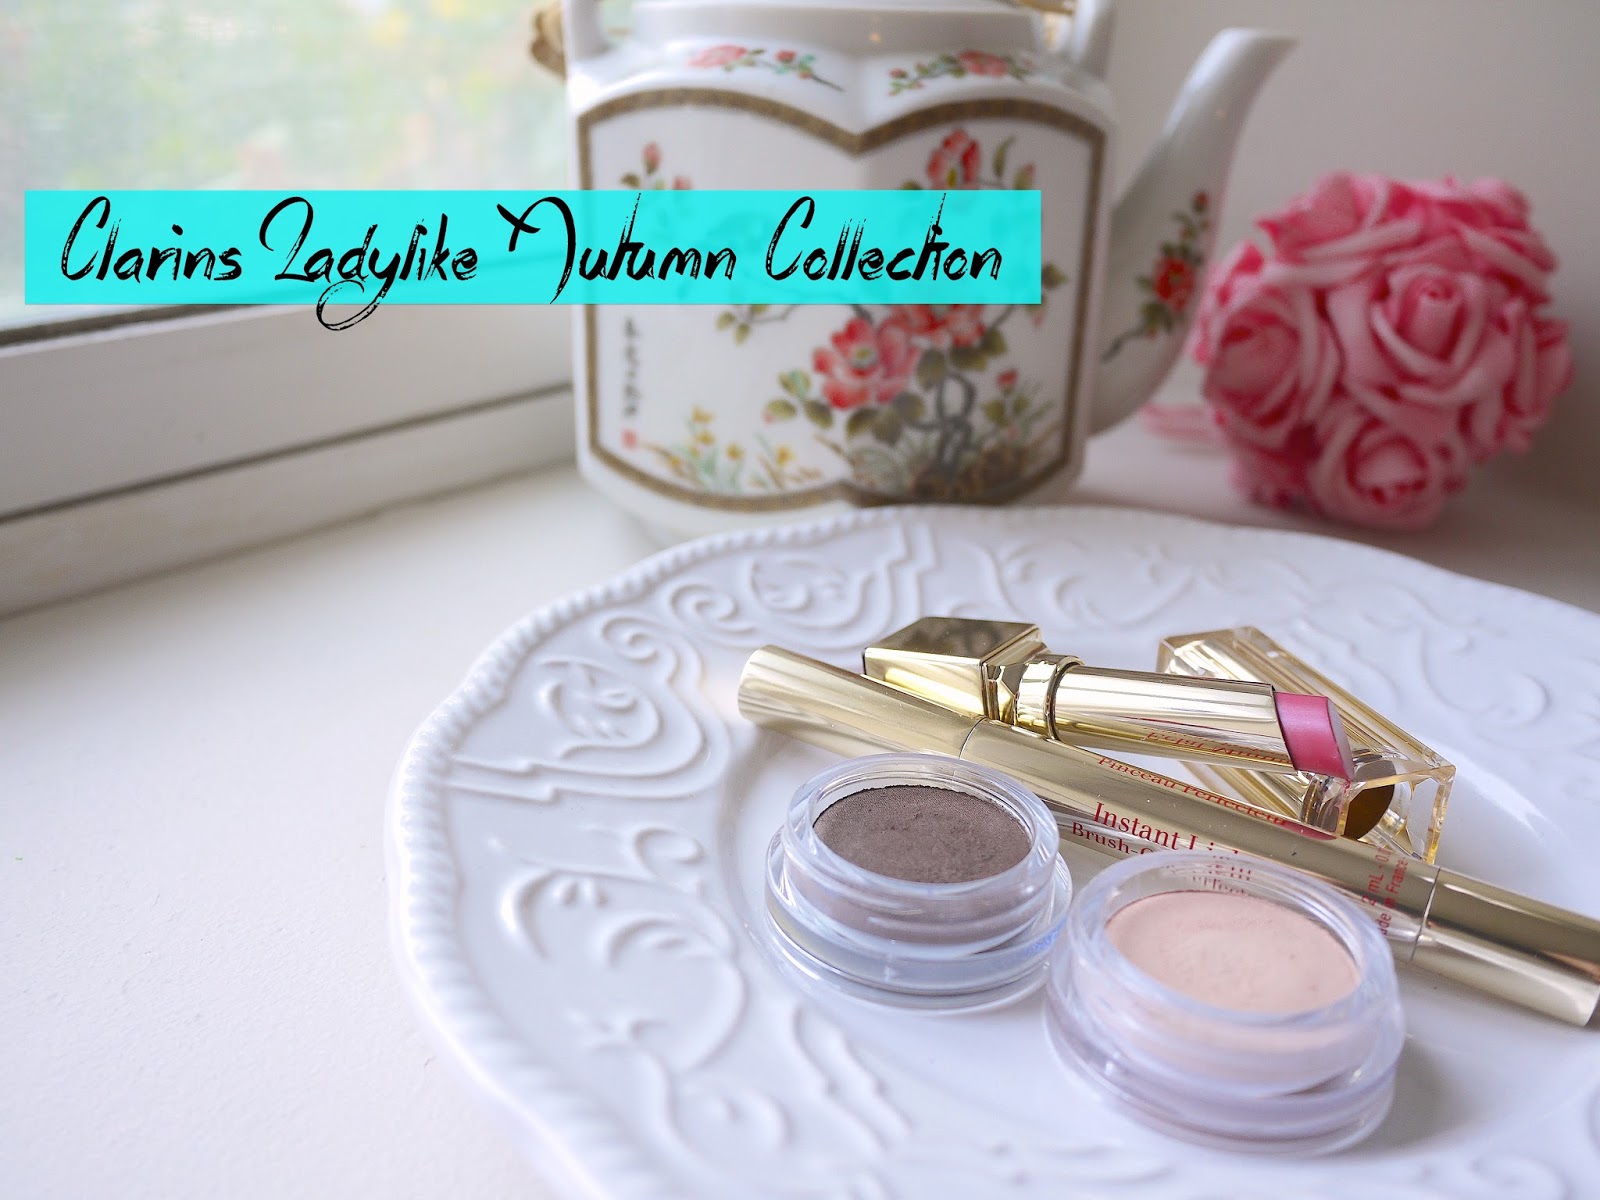 Clarins Ladylike 2014 Autumn MakeUp Collection nude pink earth candy rose swatch review